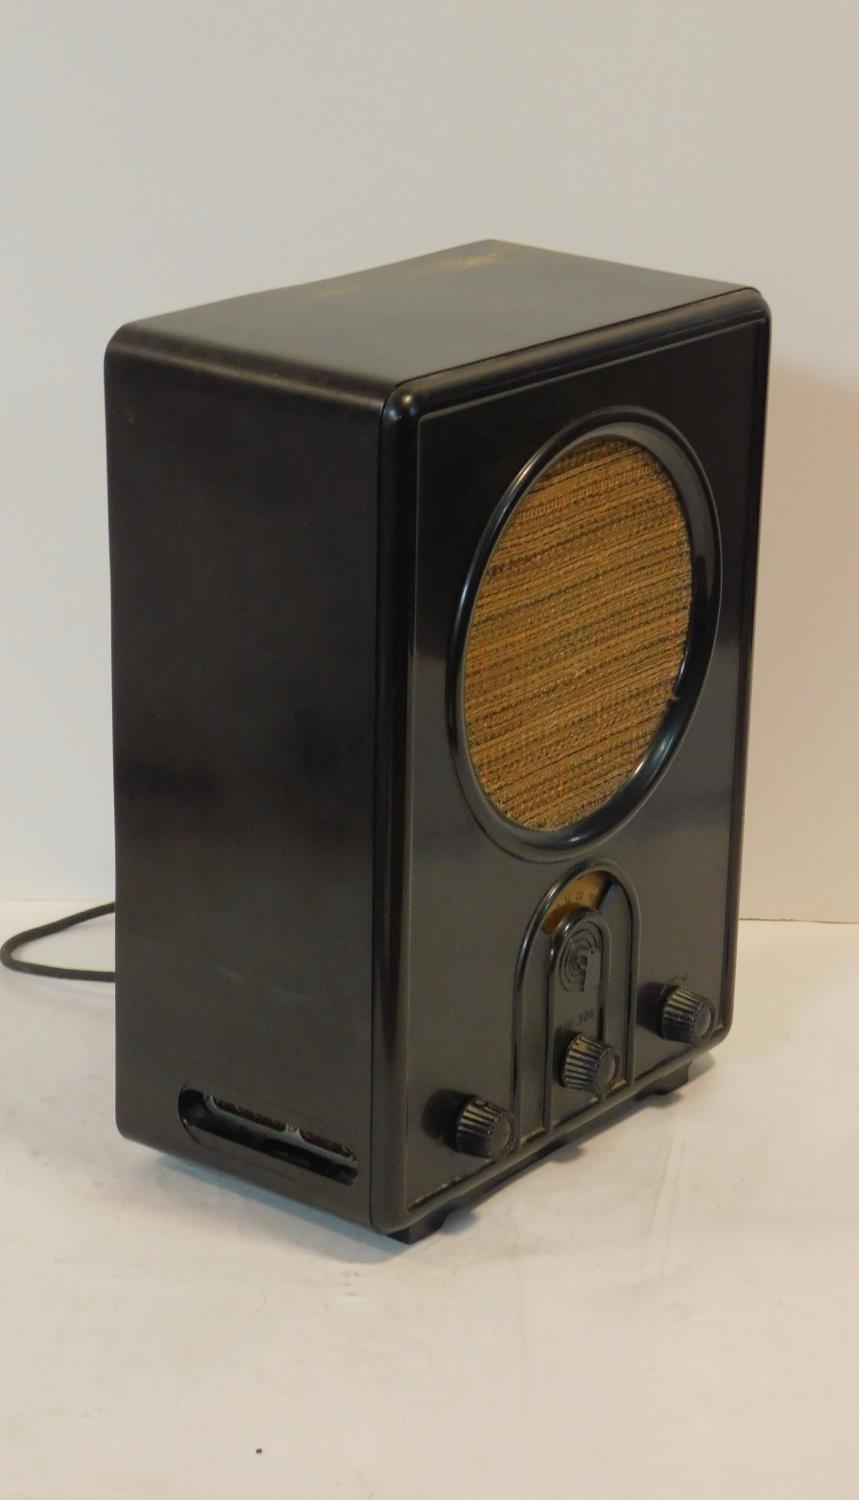 A WW2 bakelite radio, Volksempfänger Model VE301 (Peoples Radio) with the German Imperial Eagle's - Image 2 of 6